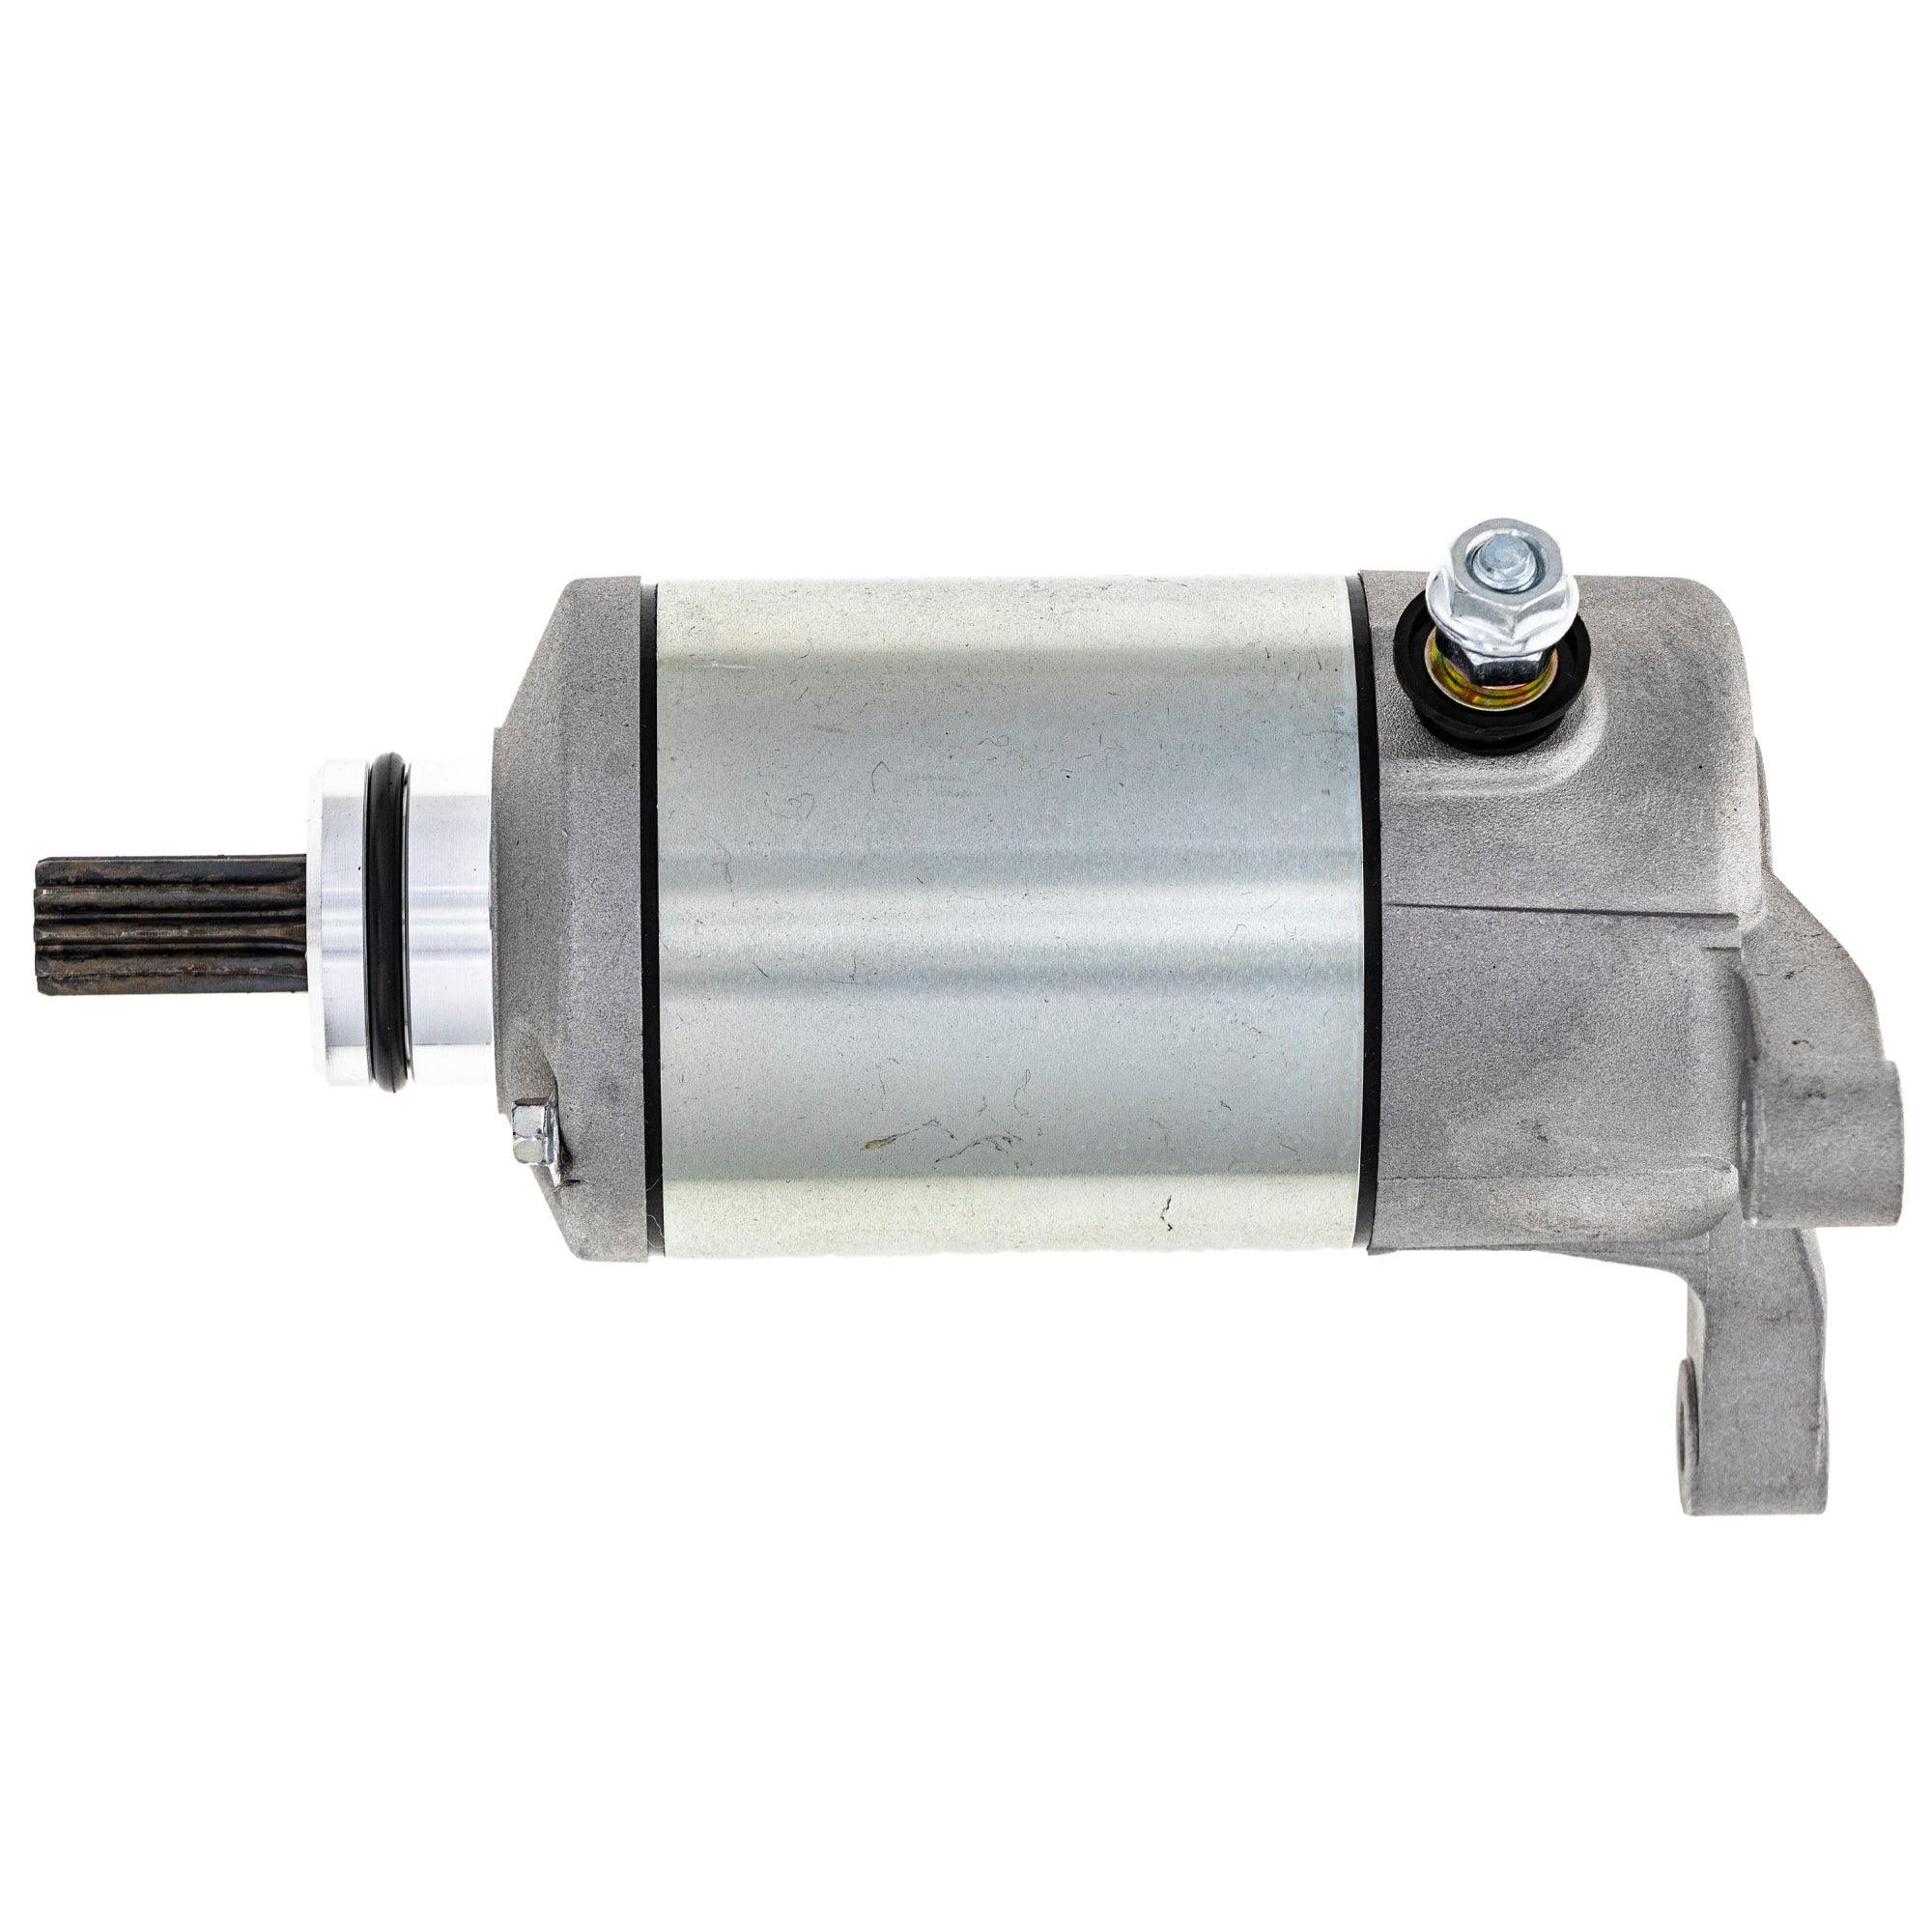 NICHE 519-CSM2482O Starter Motor Assembly for zOTHER